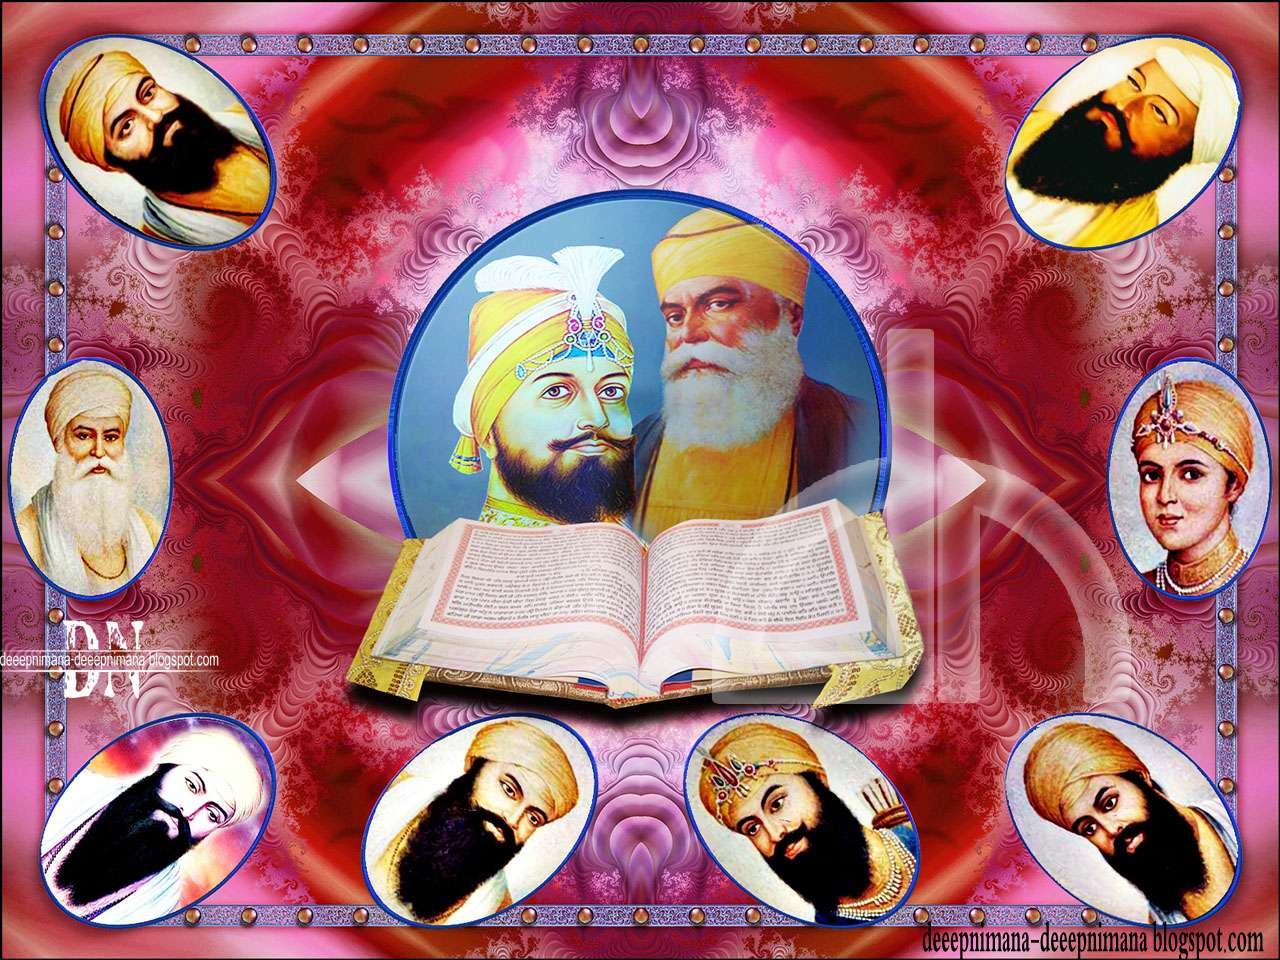 Download Free Wallpapers Backgrounds   sikh gurus sikhi wallpapers